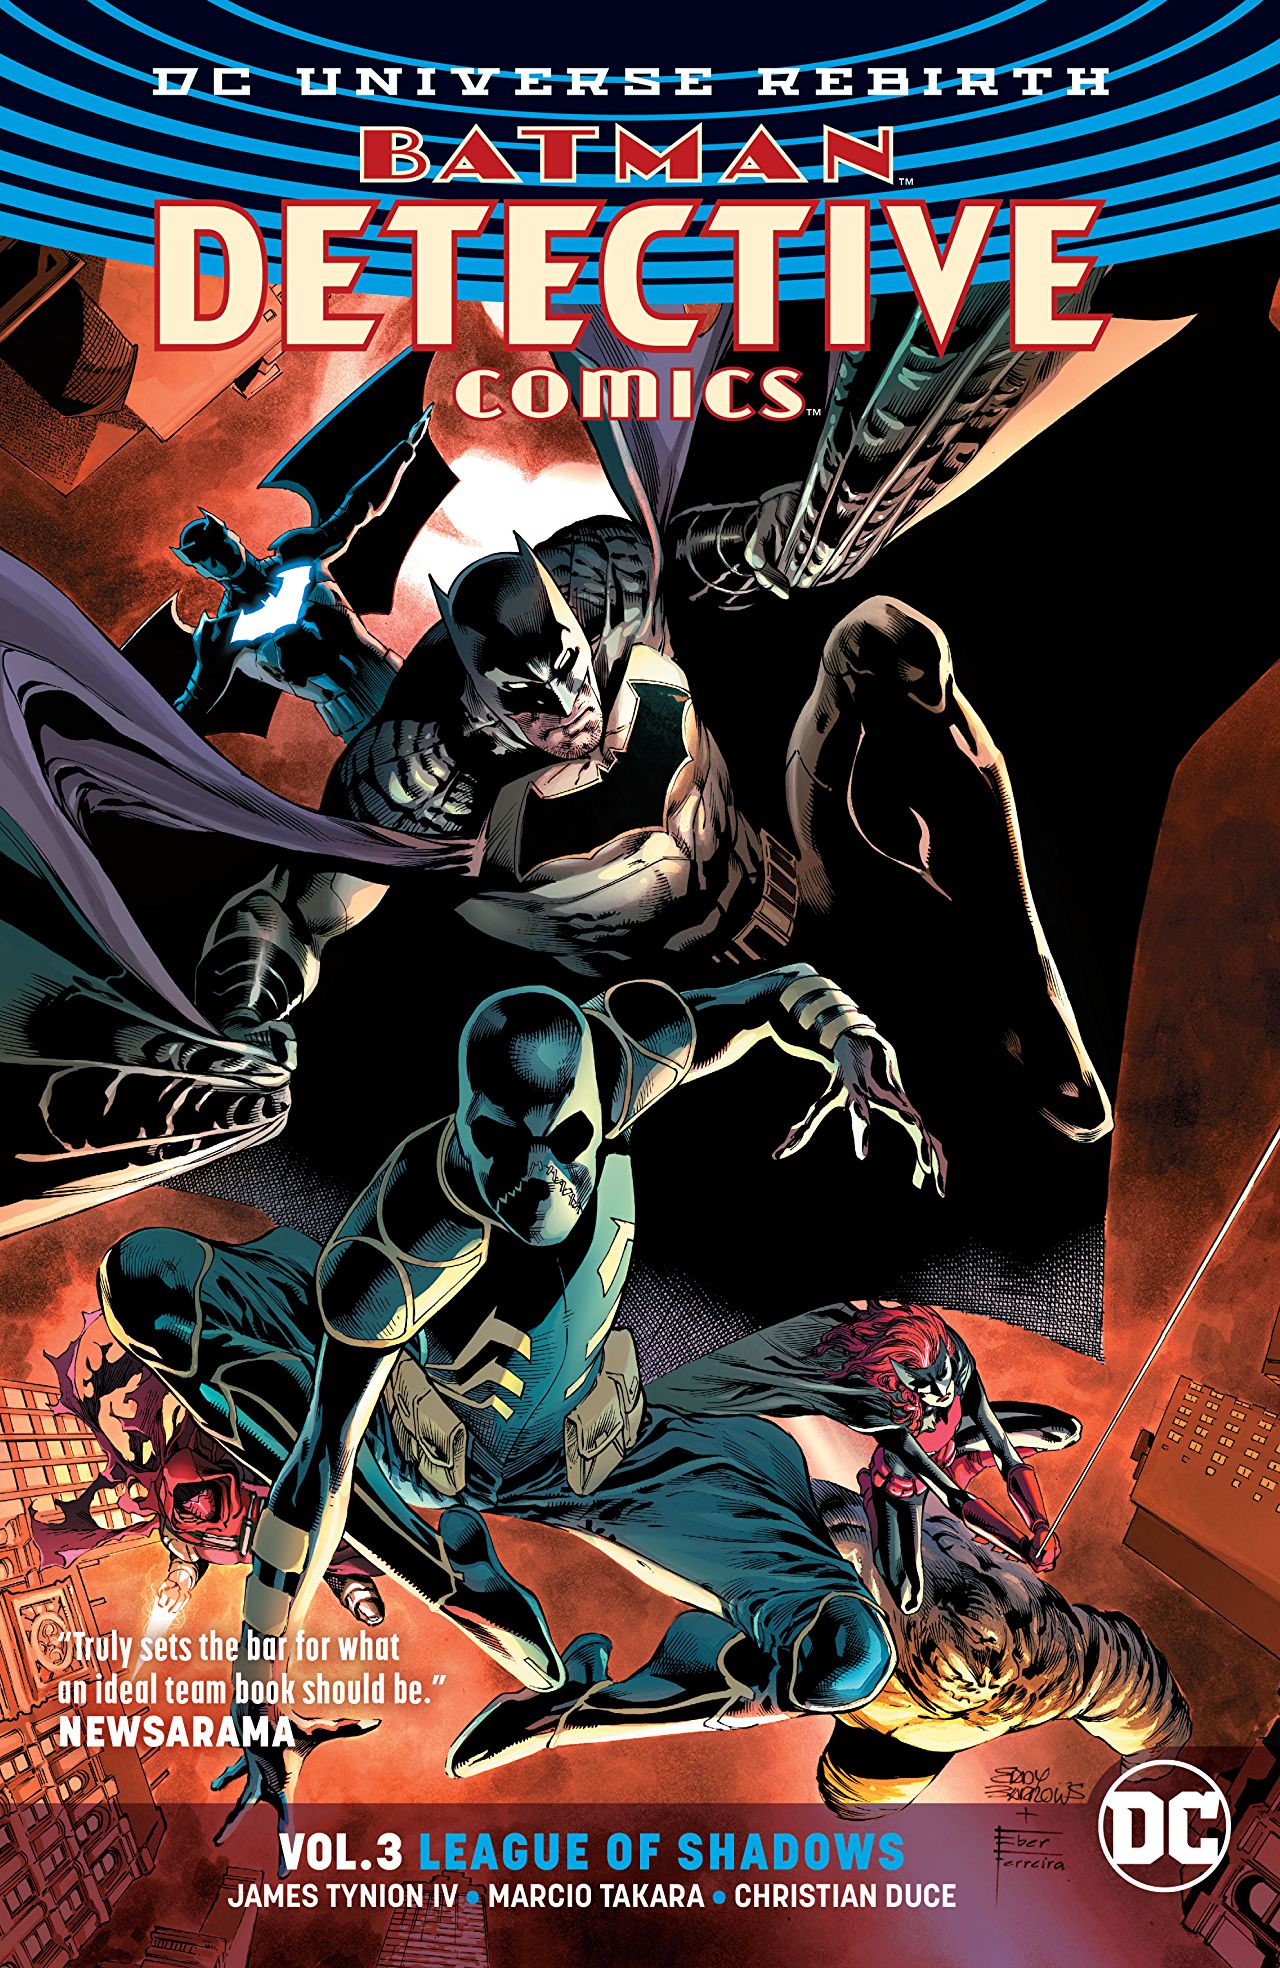 'Detective Comics Vol. 3: League of Shadows' review: A story with potential overshadowed by a grander story on the horizon